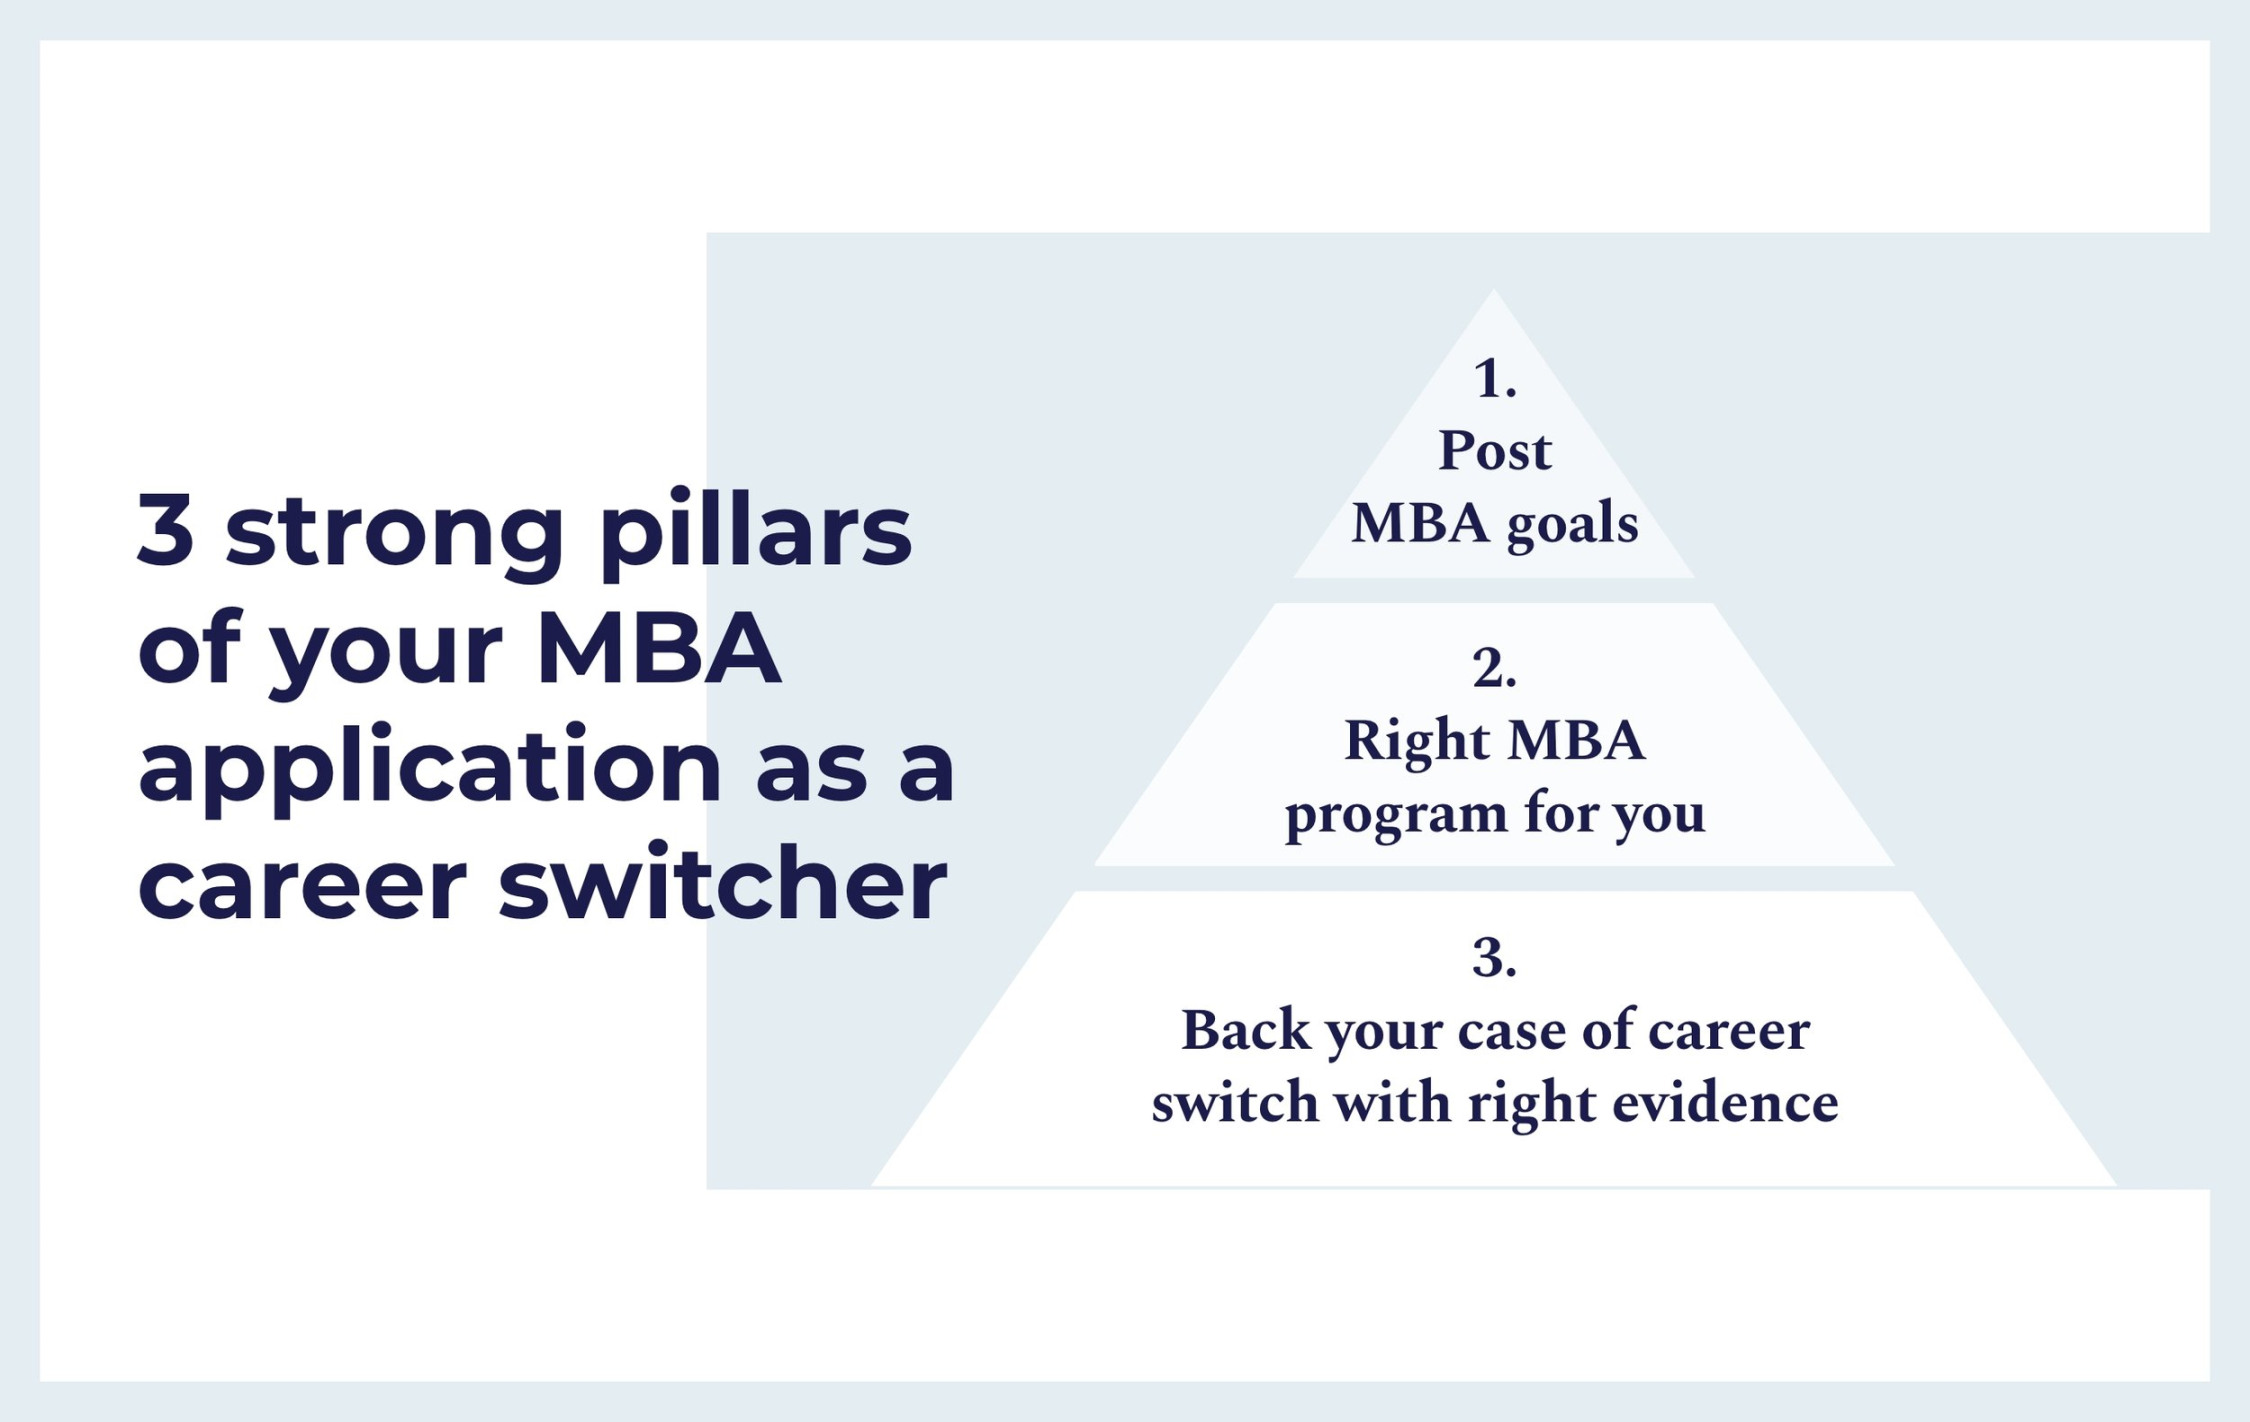 Here is how you can justify your career switch to pursue an MBA